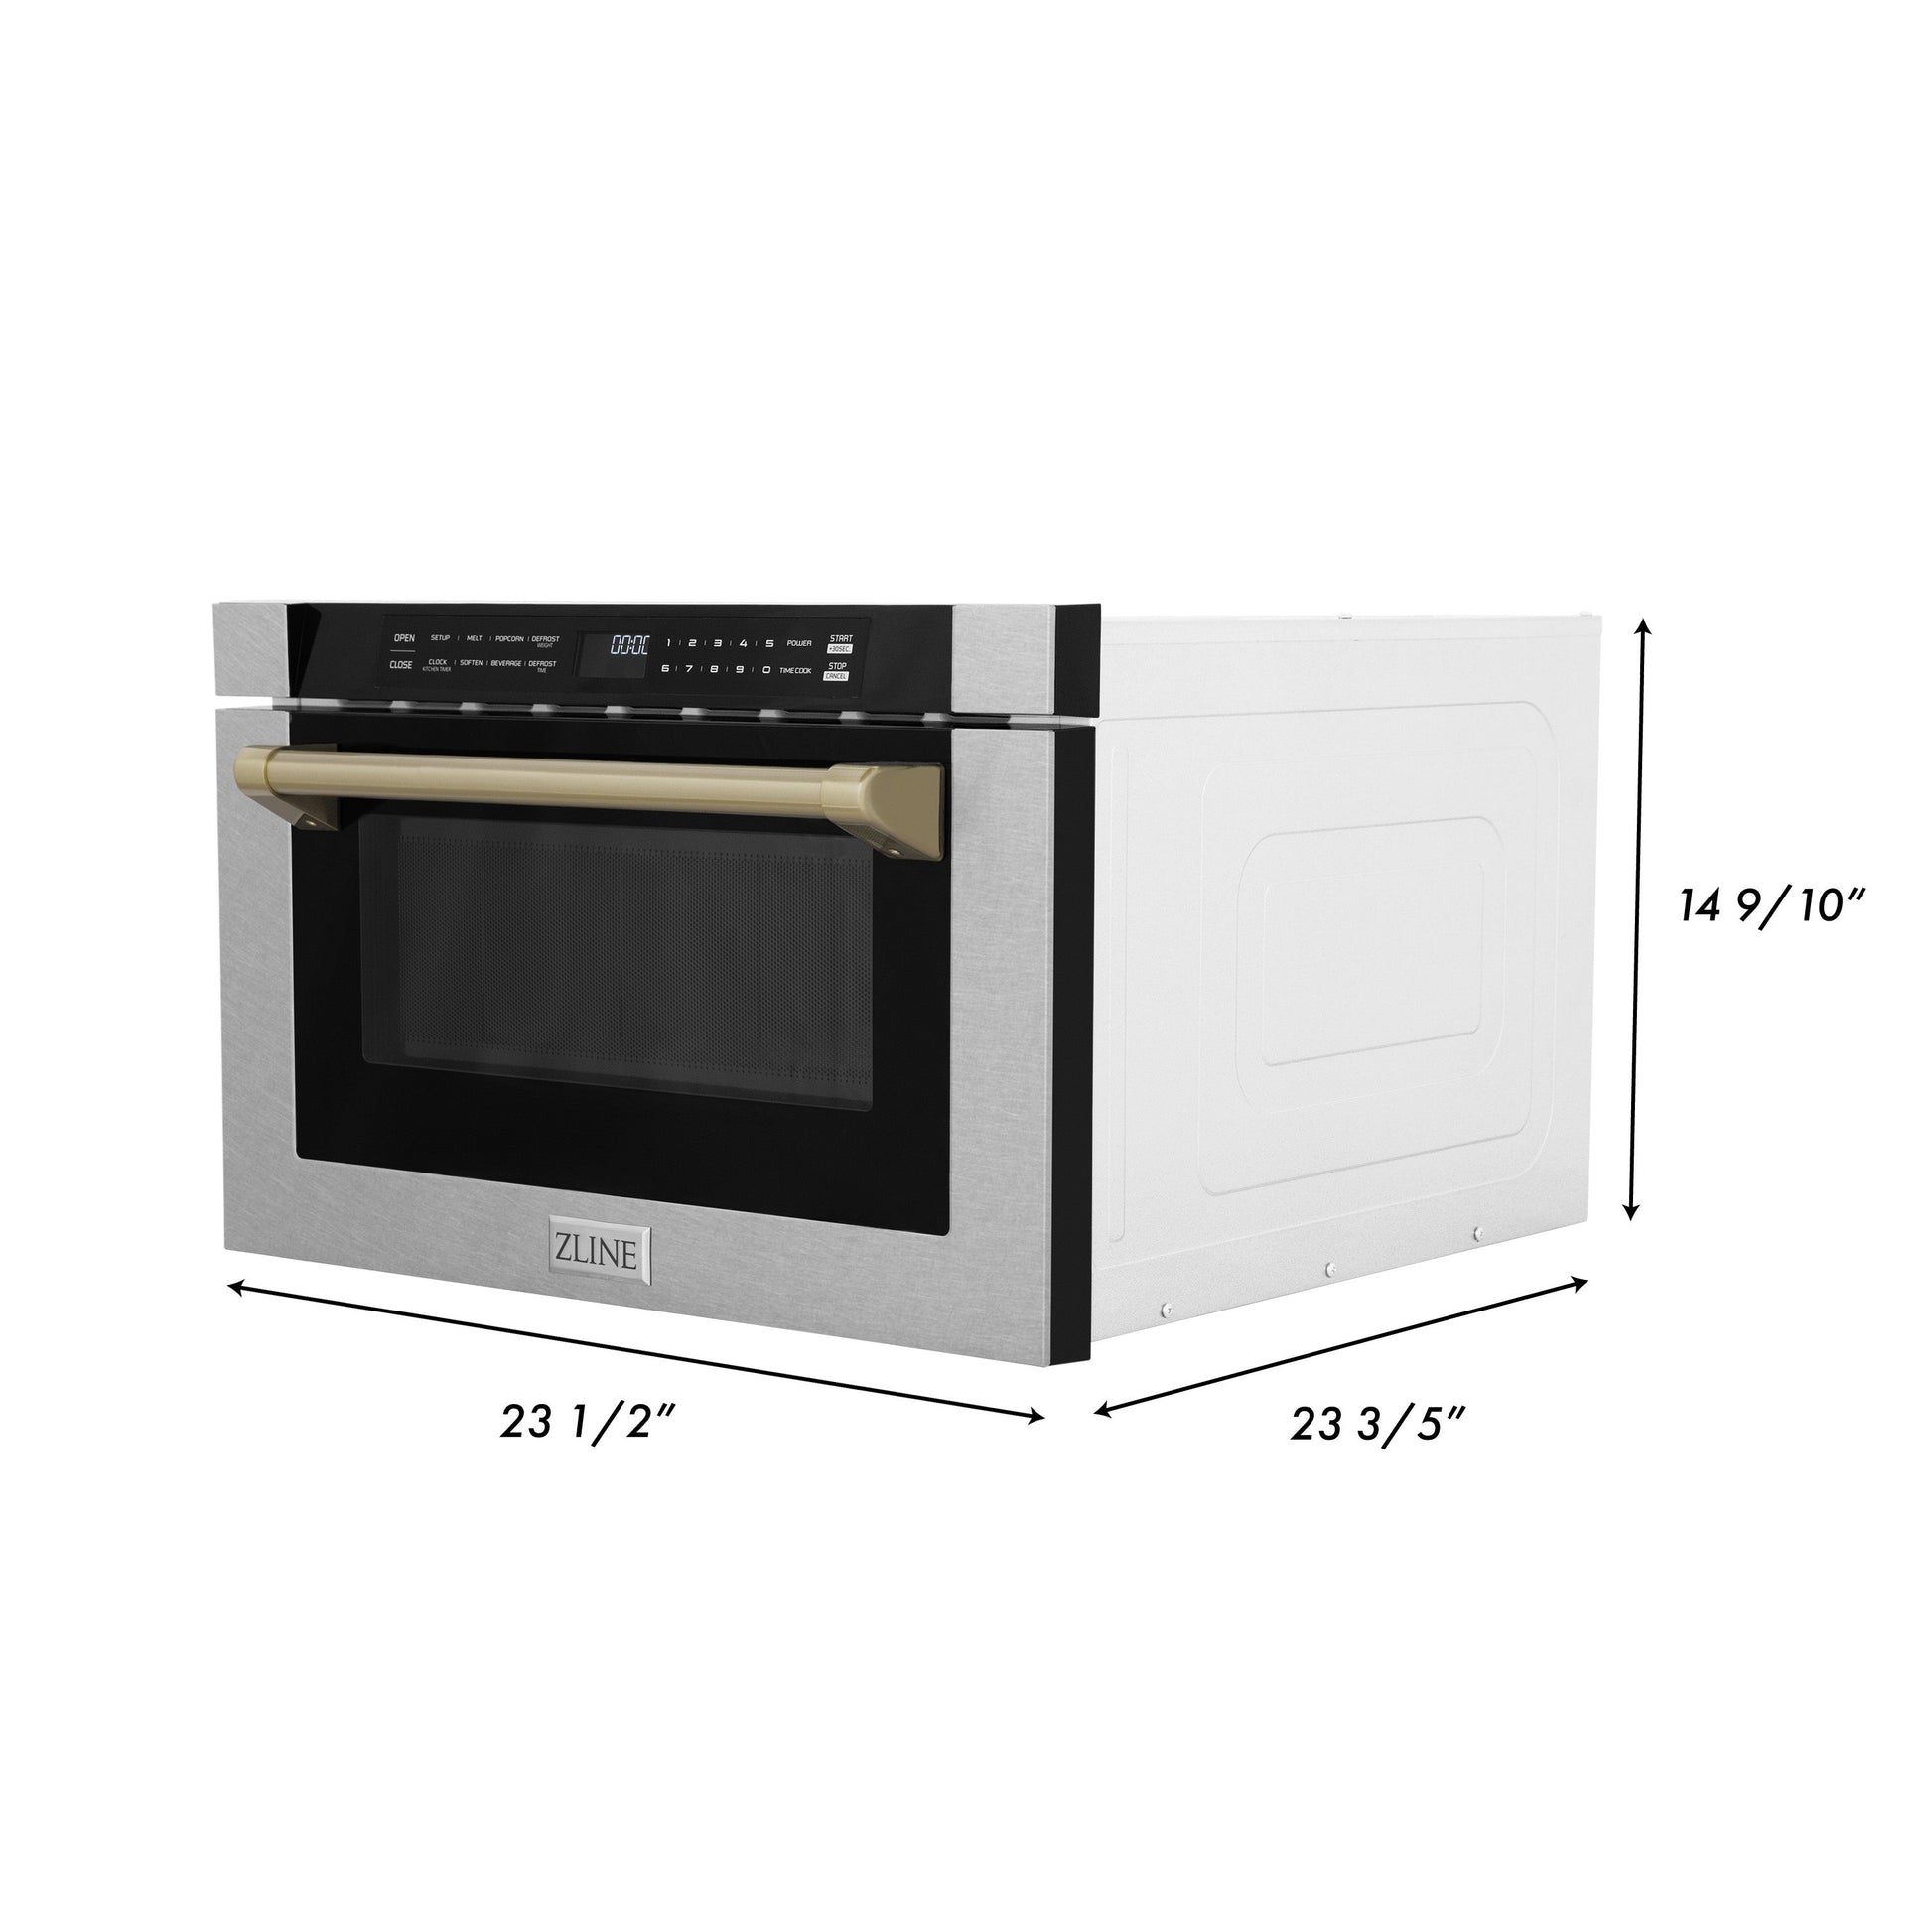 ZLINE Autograph Edition 24" Microwave - Fingerprint Resistant Stainless Steel with Traditional Handles and Accents